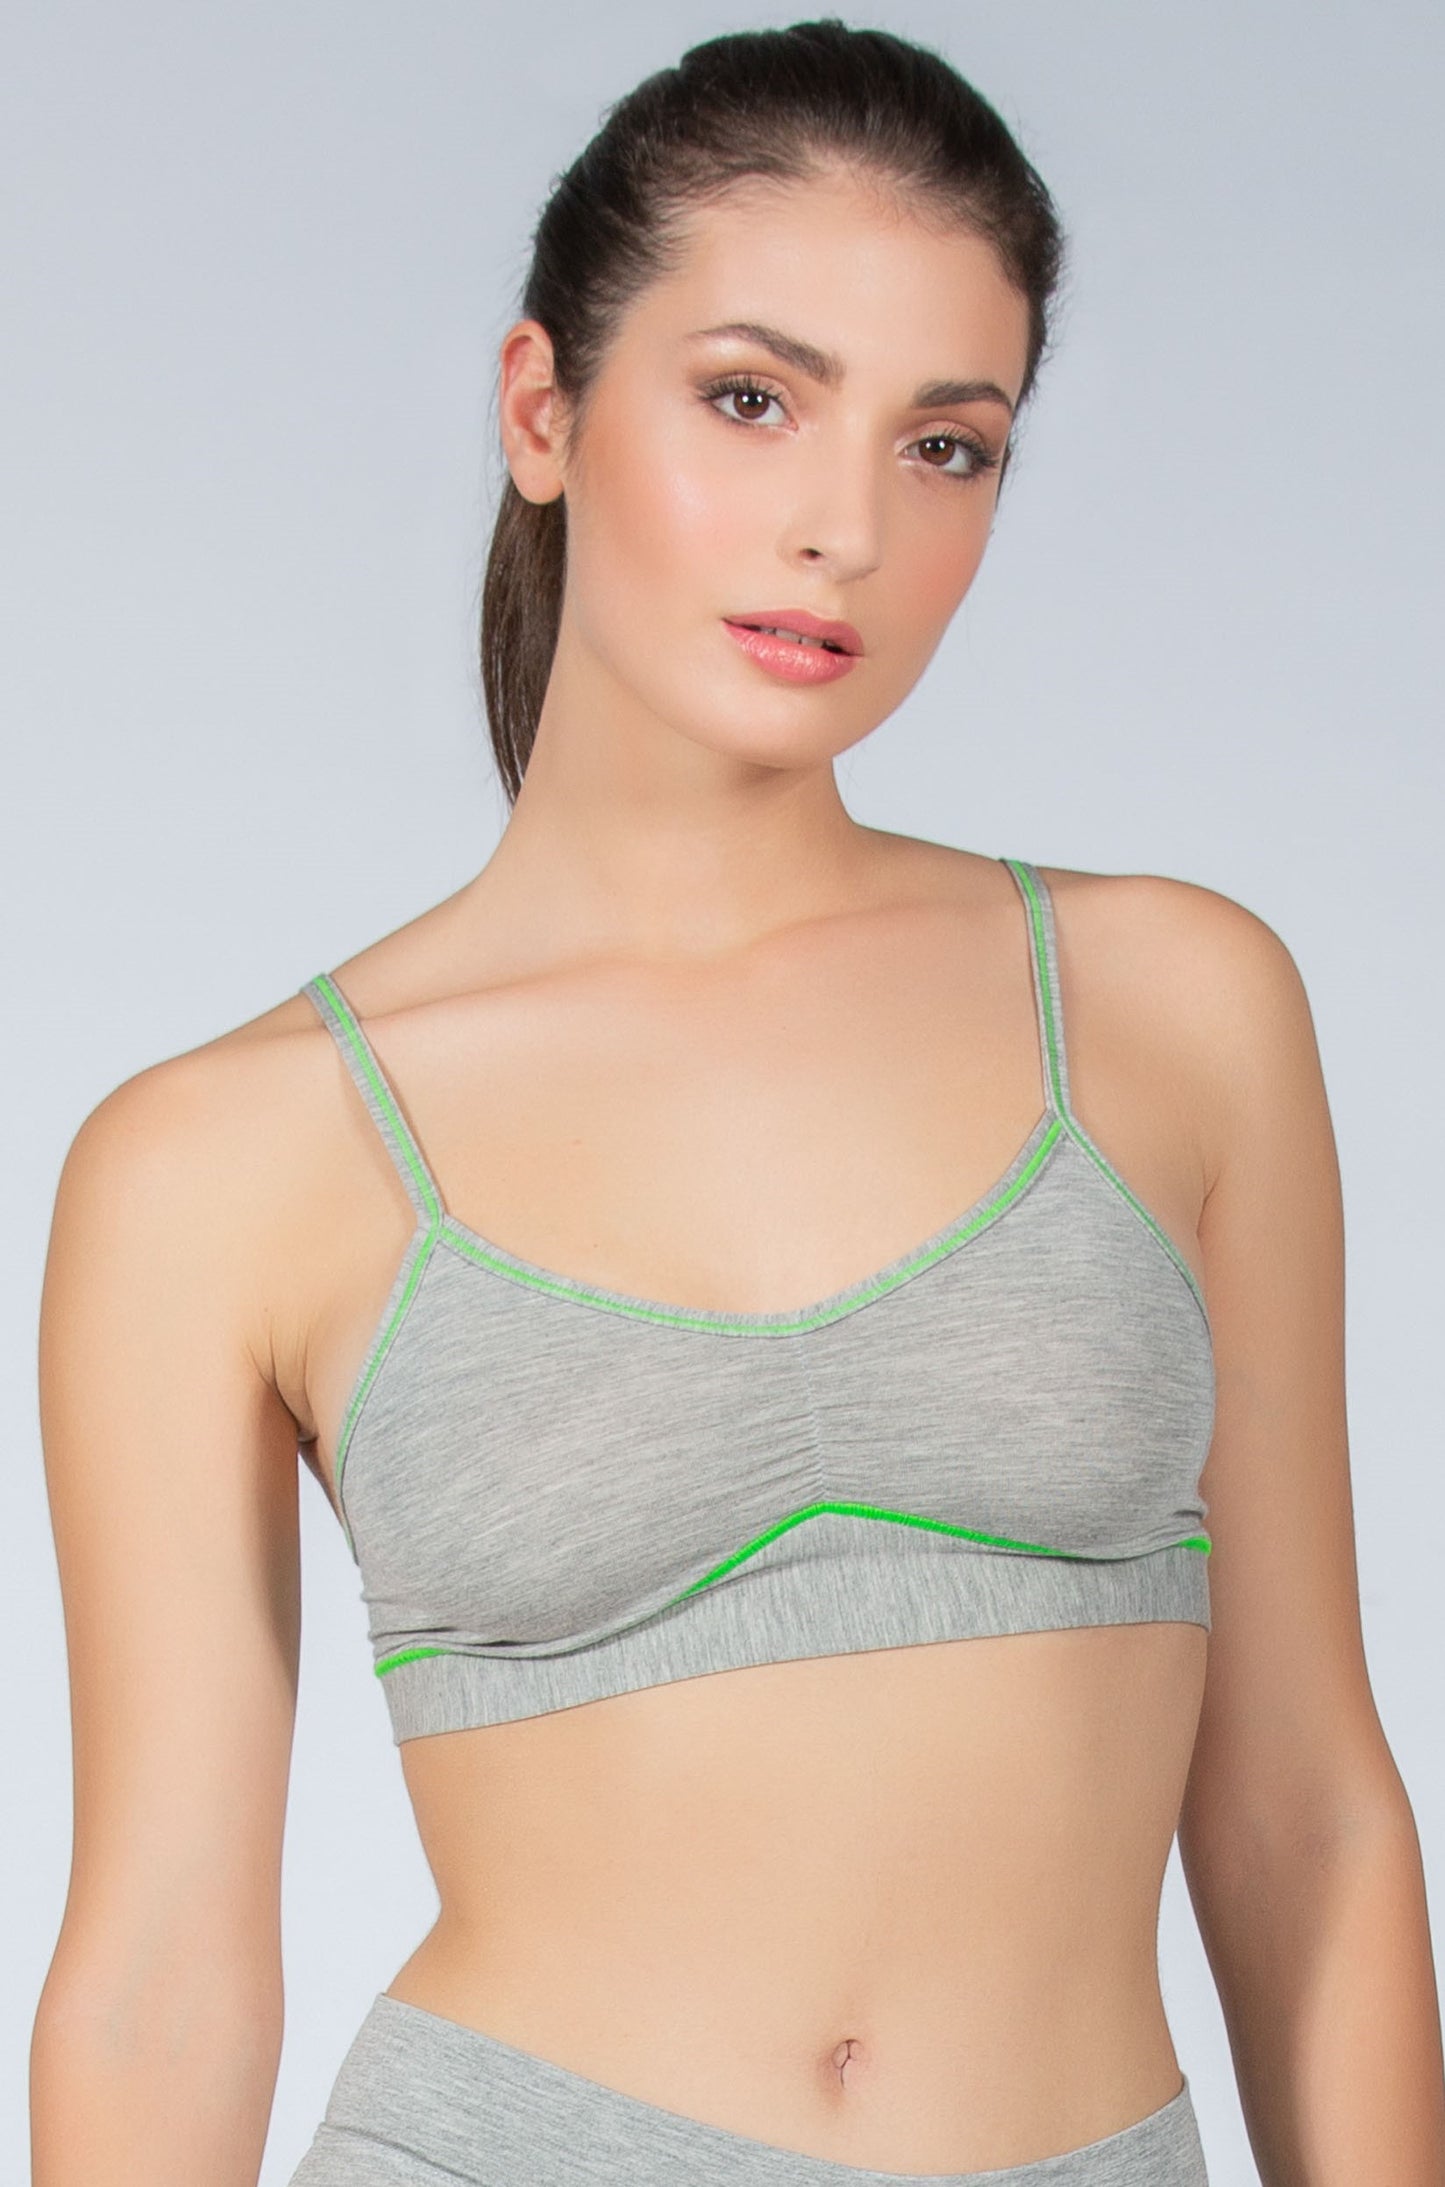 This bralette is weightless and comfortable, featuring a seamless cup and metal-free construction. Crafted from high-quality Lenzing Modal® fabric, it is lightweight and pleasantly soft to the touch.